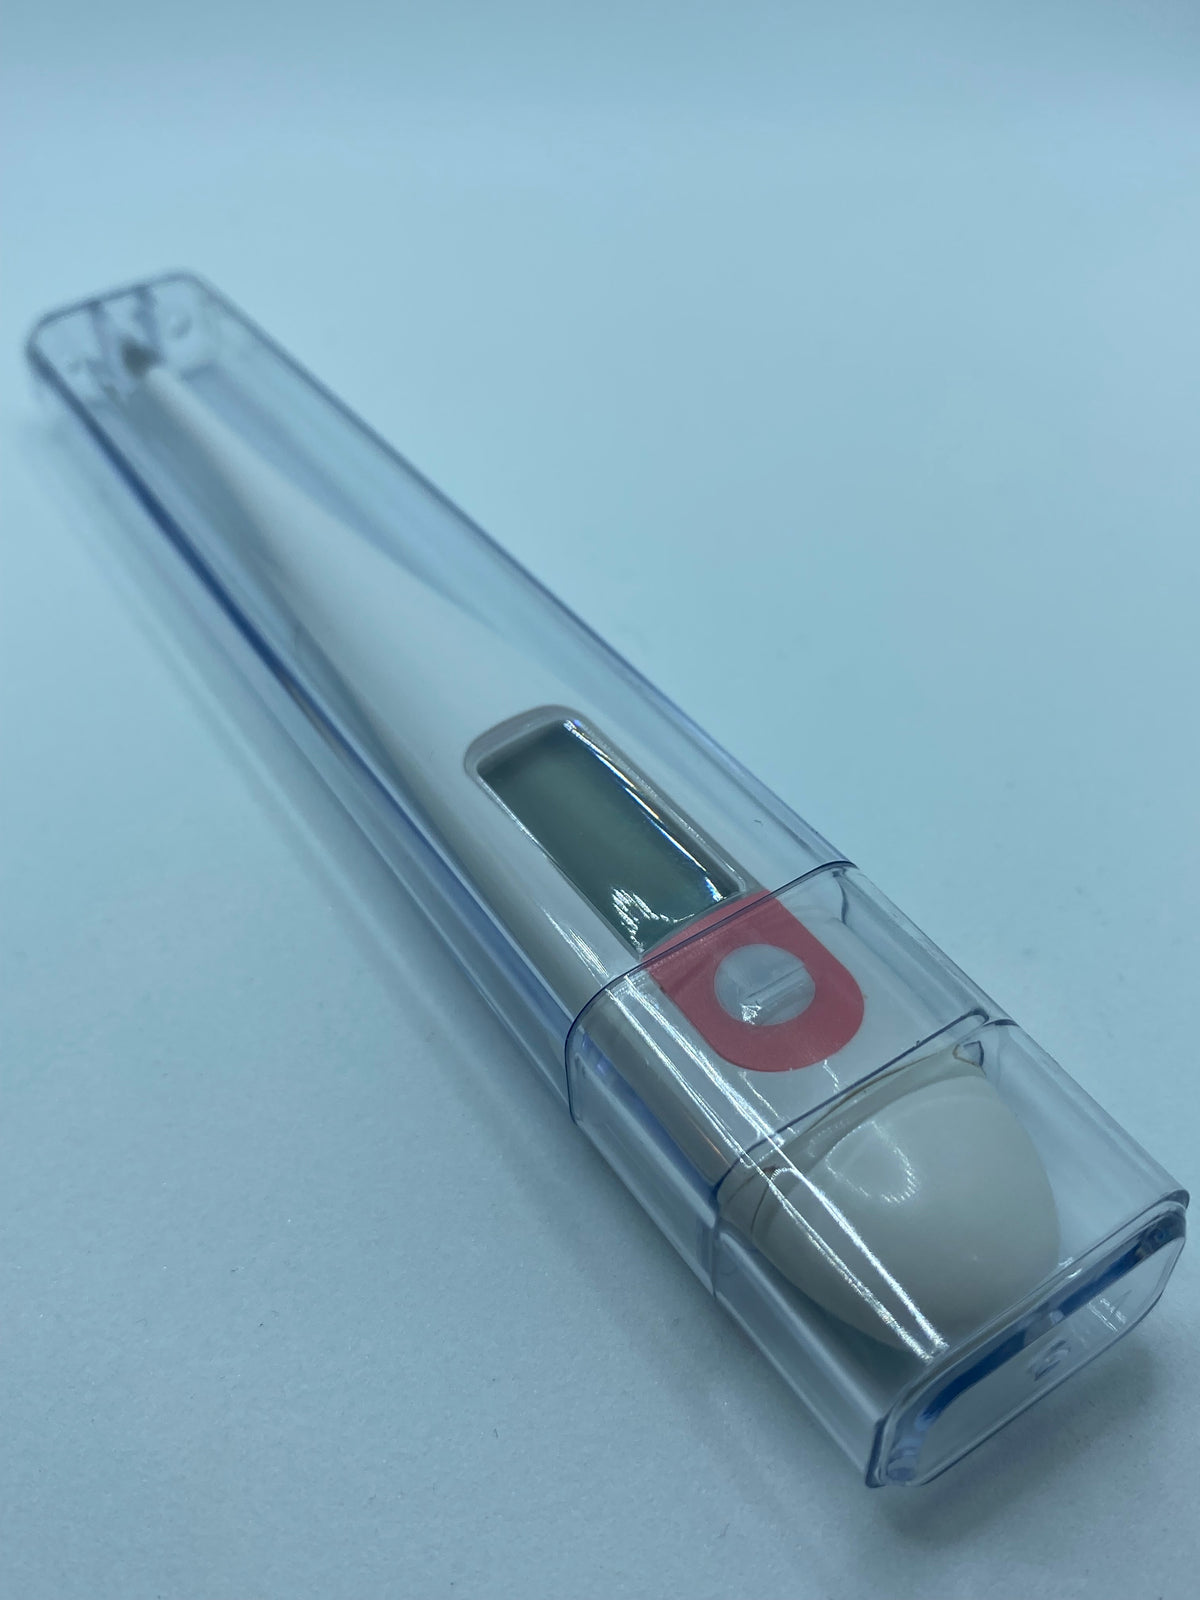 Digital Thermometer - Measures in Fahrenheit